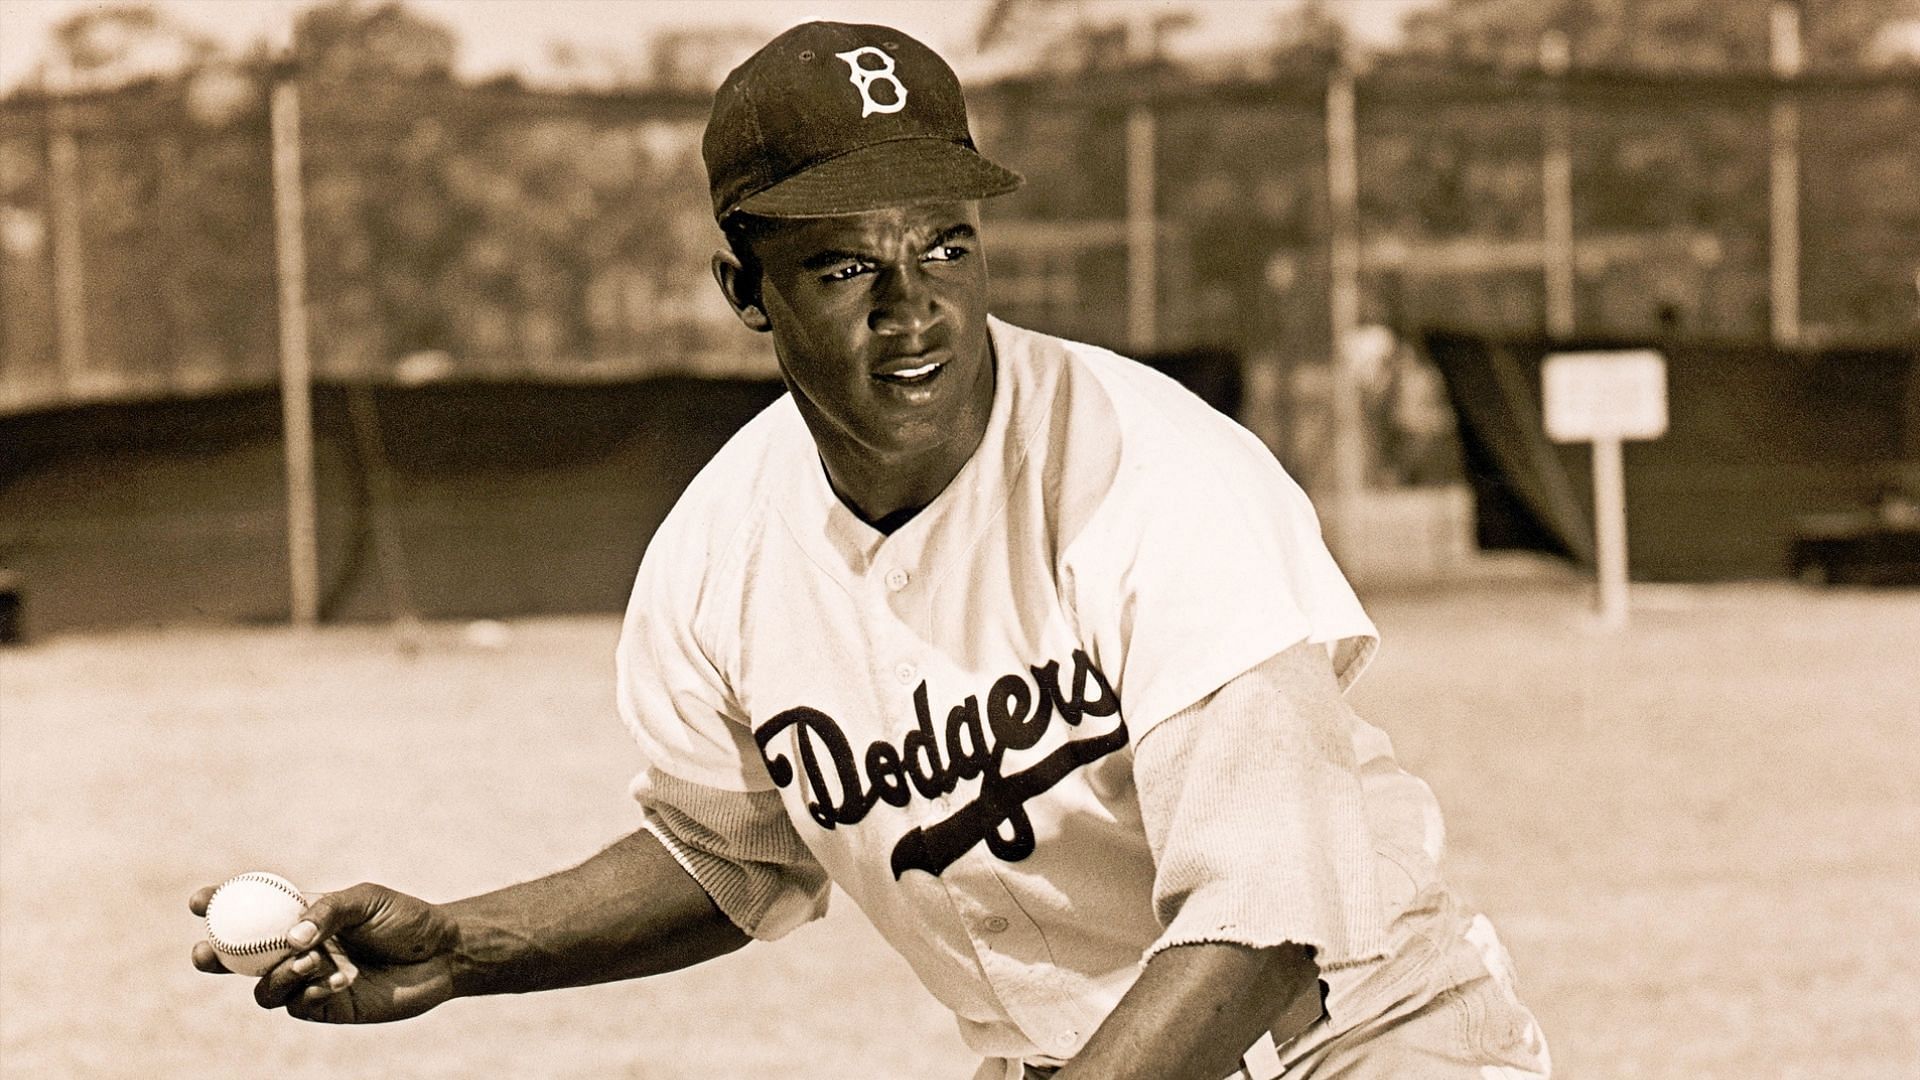 MLB celebrates Jackie Robinson Day in year of his 100th birthday